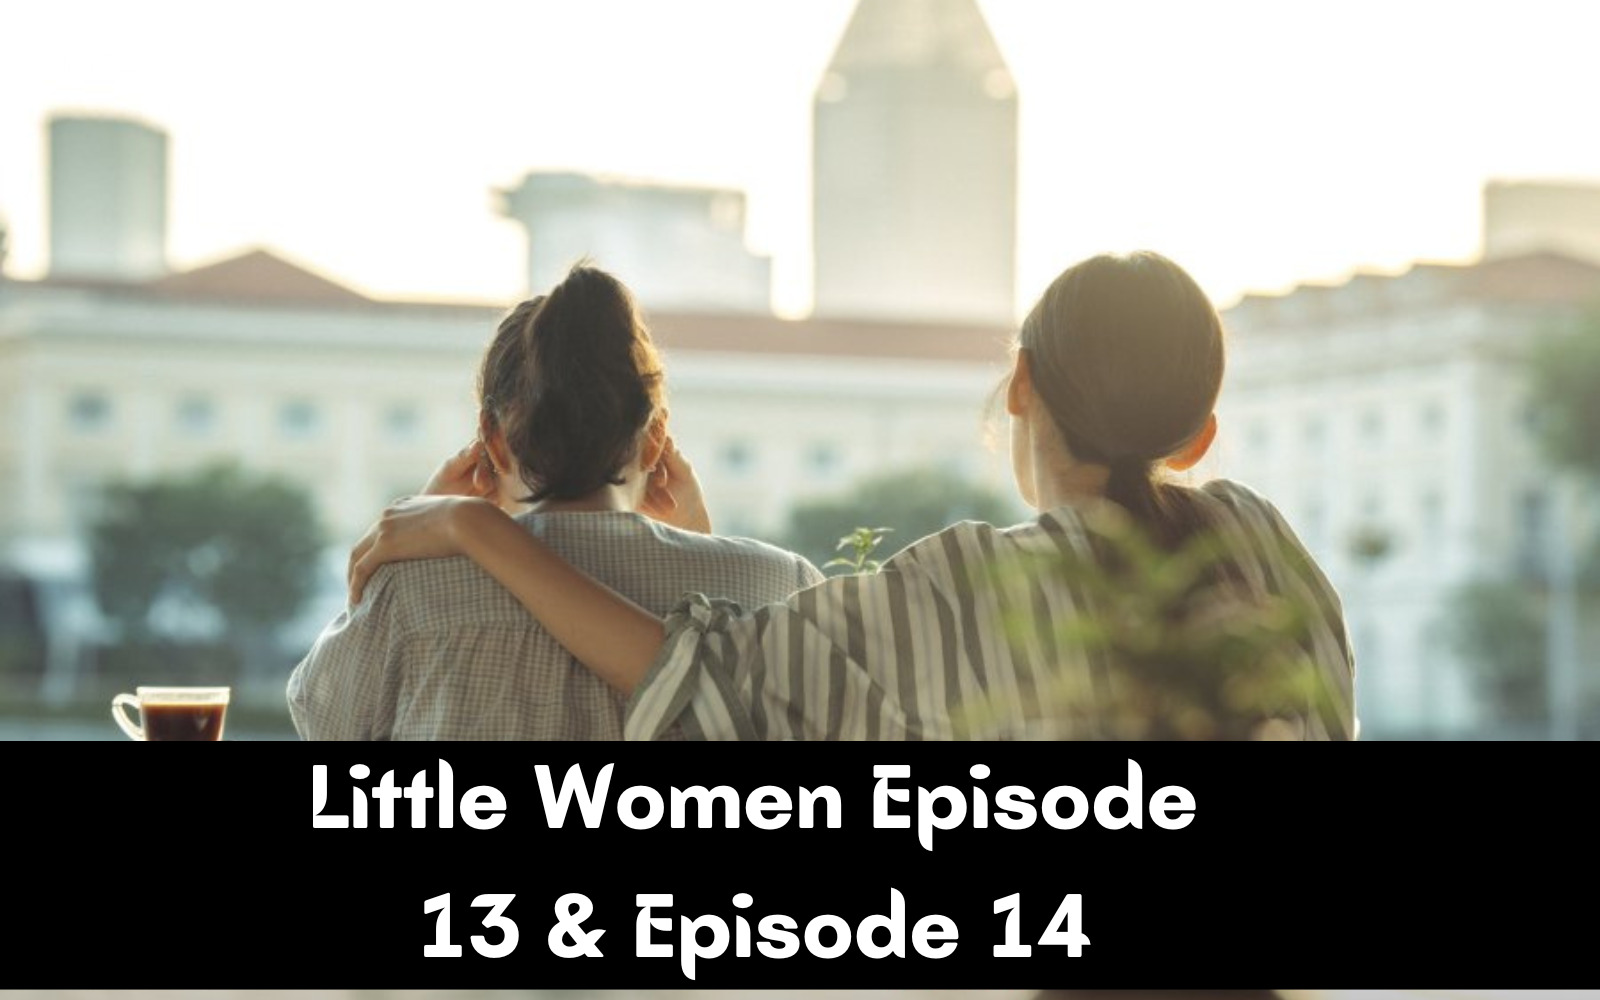 When Is Little Women Episode 13 & Episode 14 Coming Out (Release Date)